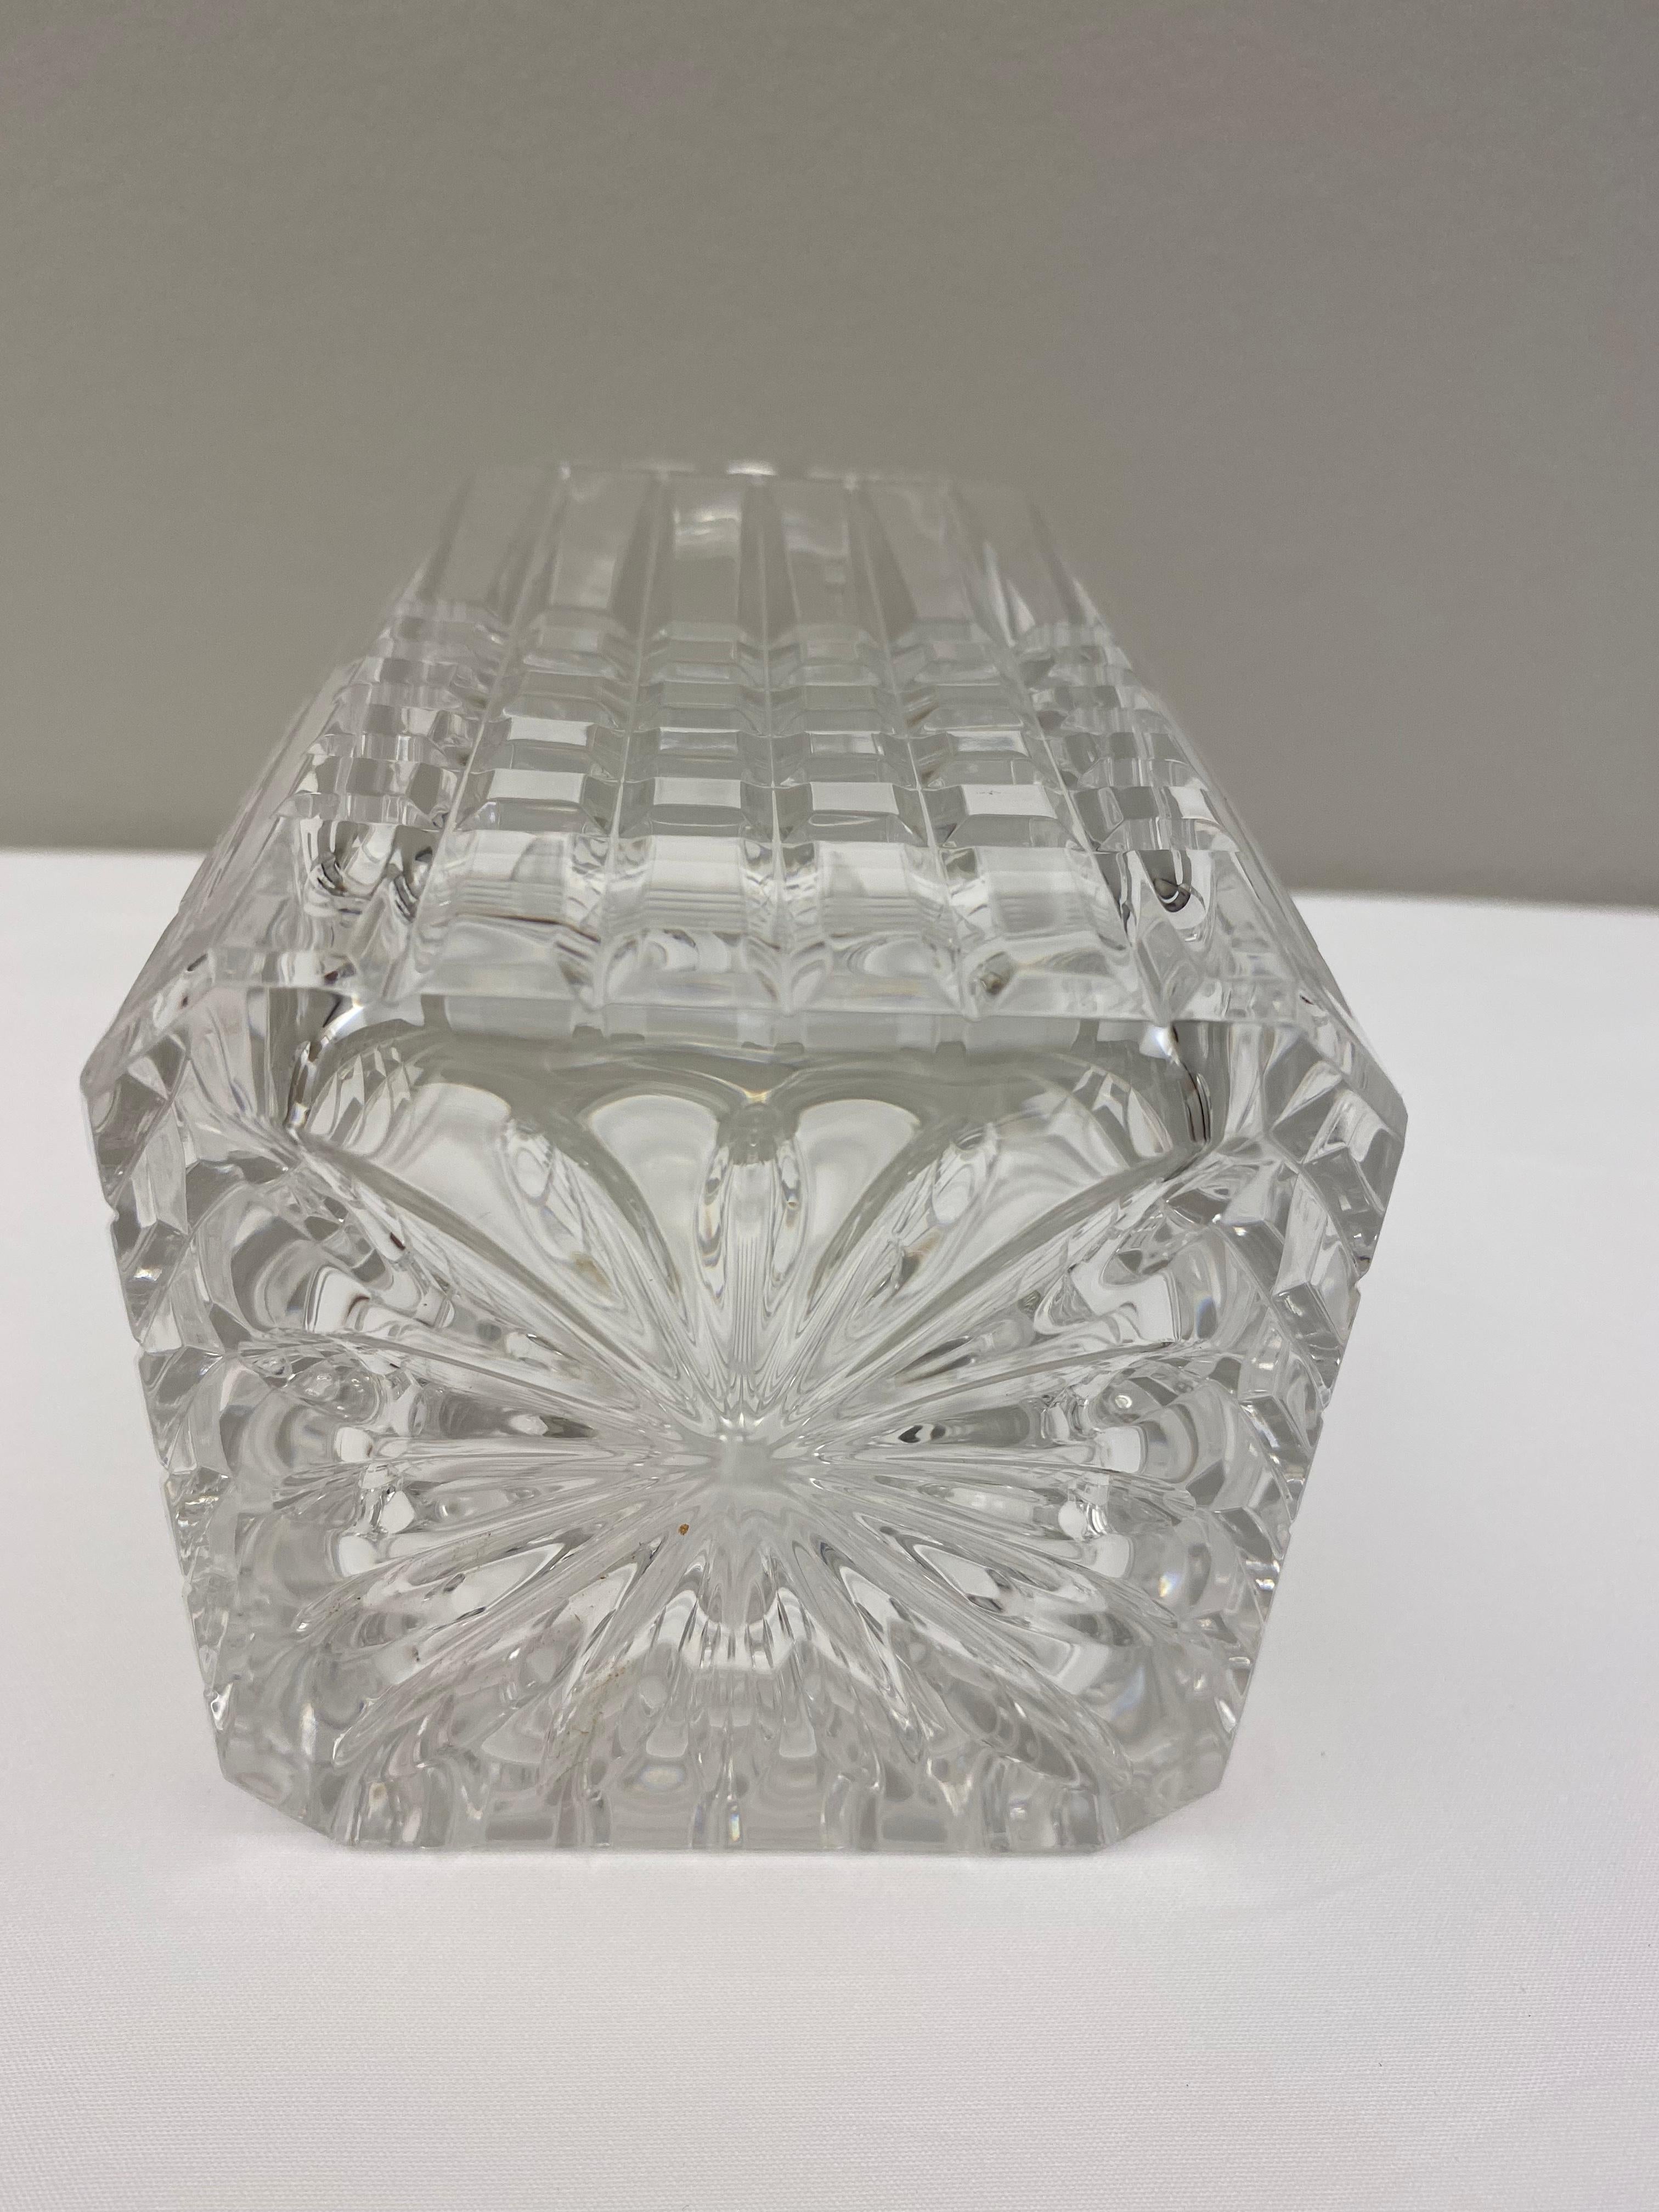 Crystal whiskey decanter by Tiffany and Co. Features a vertical arching lines on top of cubic cuts garnishing the lower half of the decanter. Finished with a spherical, faceted stopper. 

Marked: 